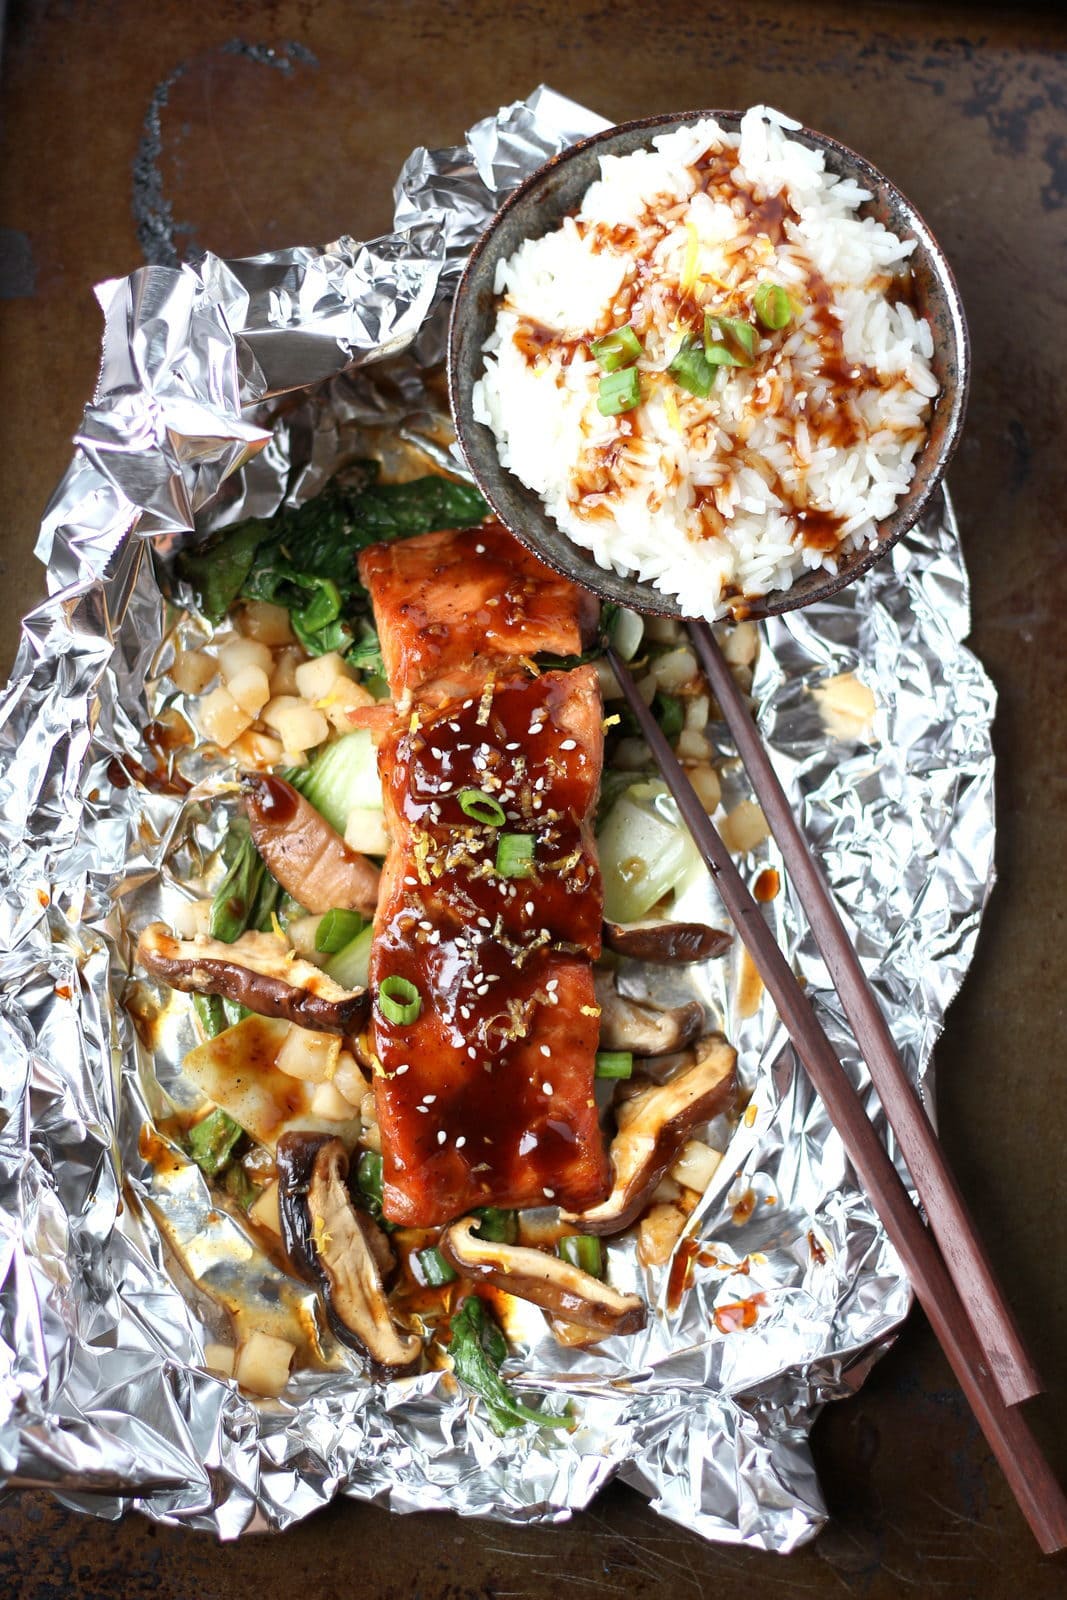 Miso Salmon in Foil with Shiitake Mushrooms, Baby Bok Choy, Spinach, Water Chestnuts and Miso Mayo over Rice - thewoodenskillet.com